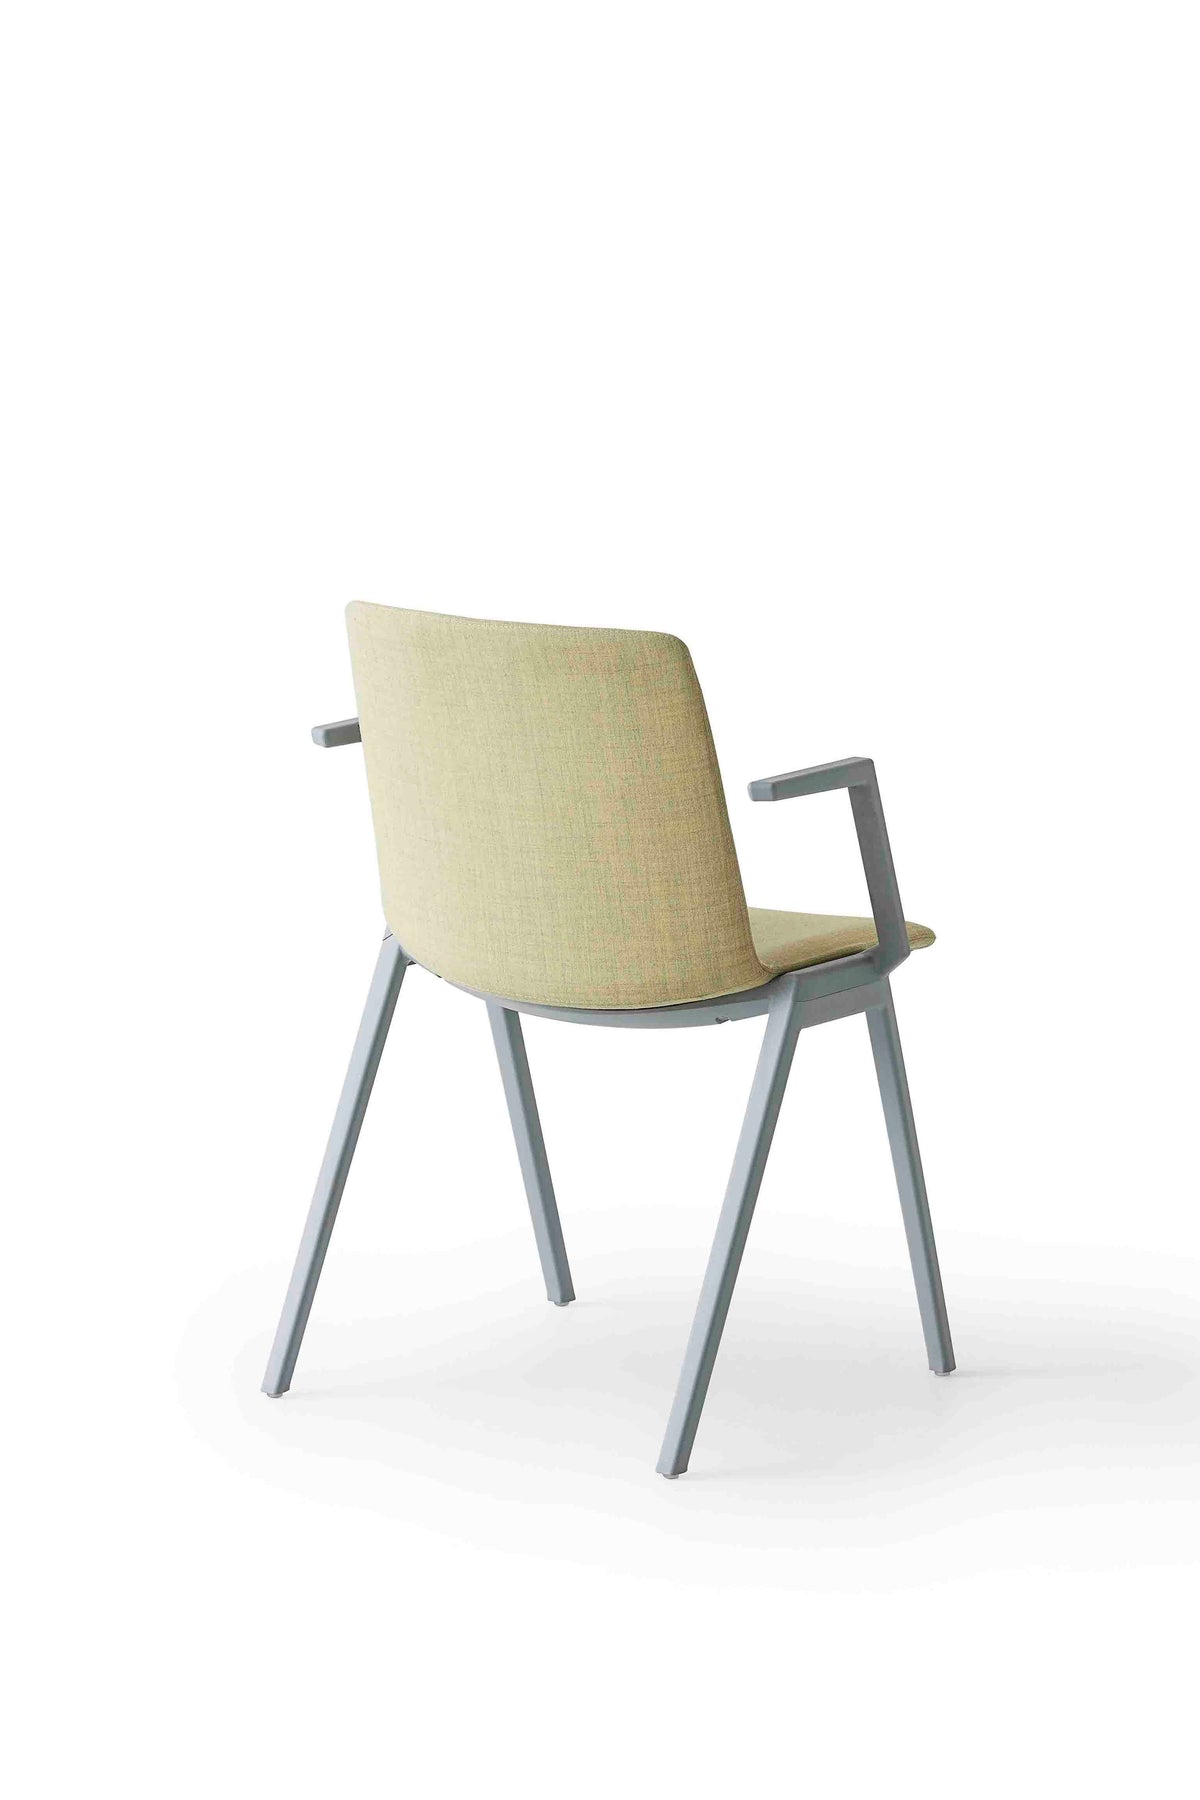 Jubel IVB Armchair-Gaber-Contract Furniture Store